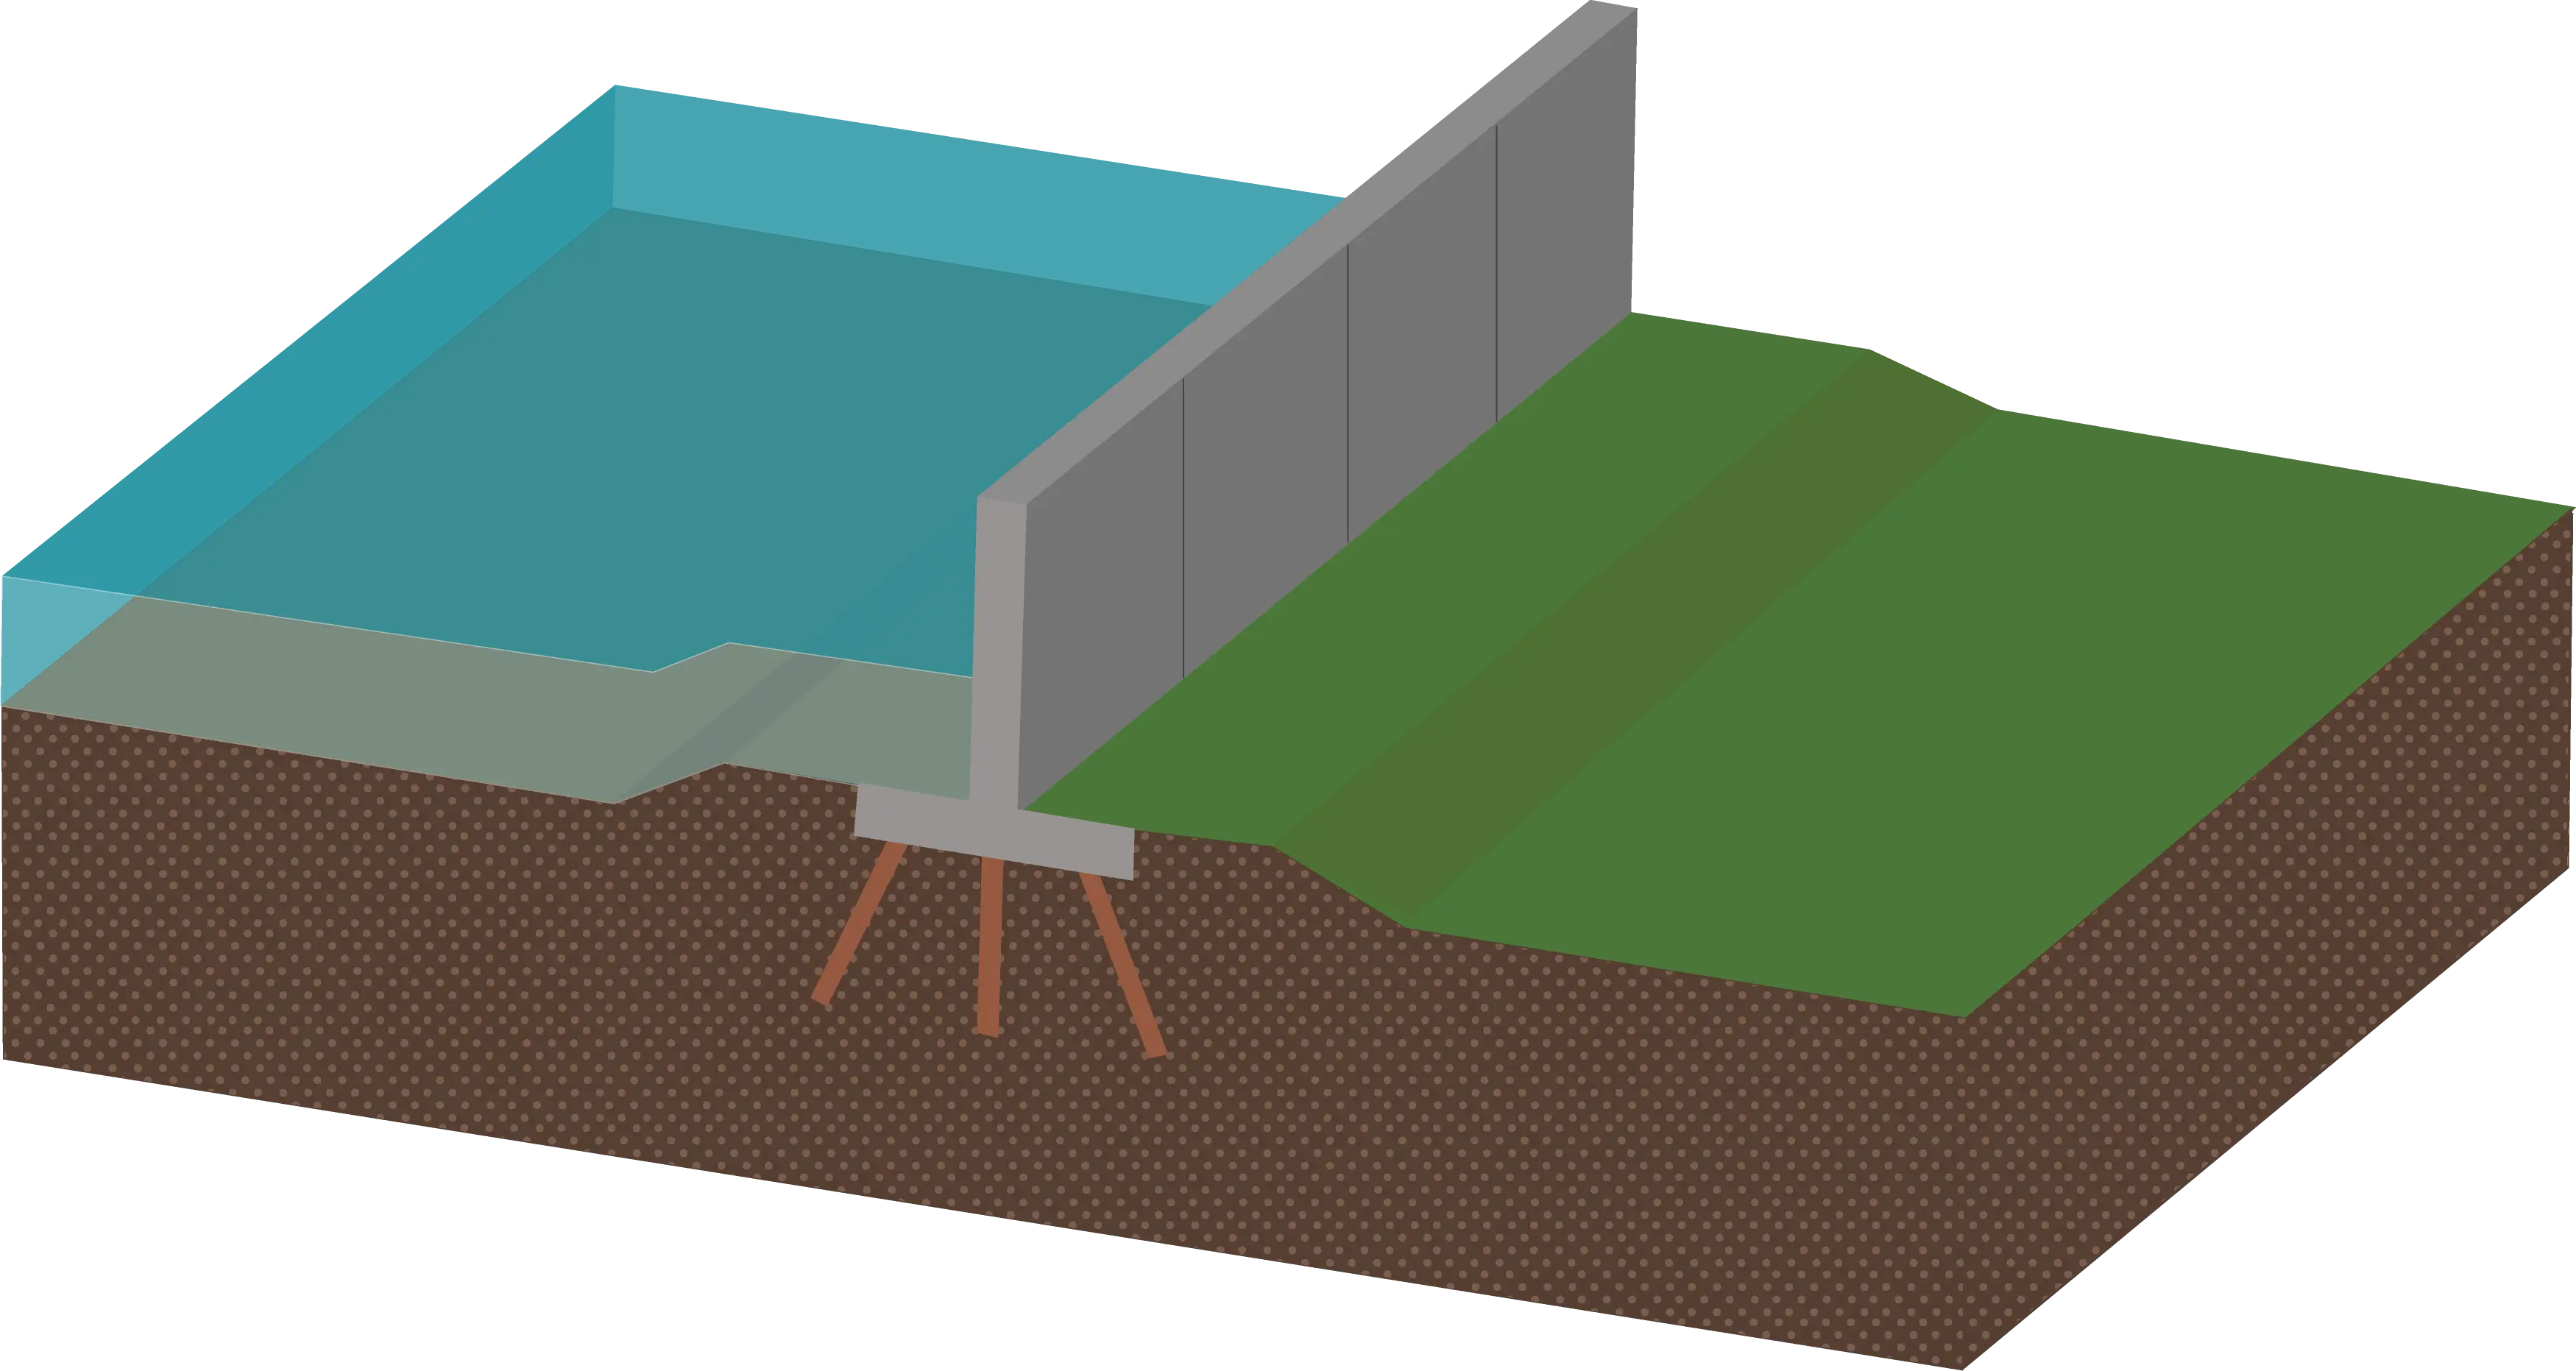 Diagram of levee - Floodwall